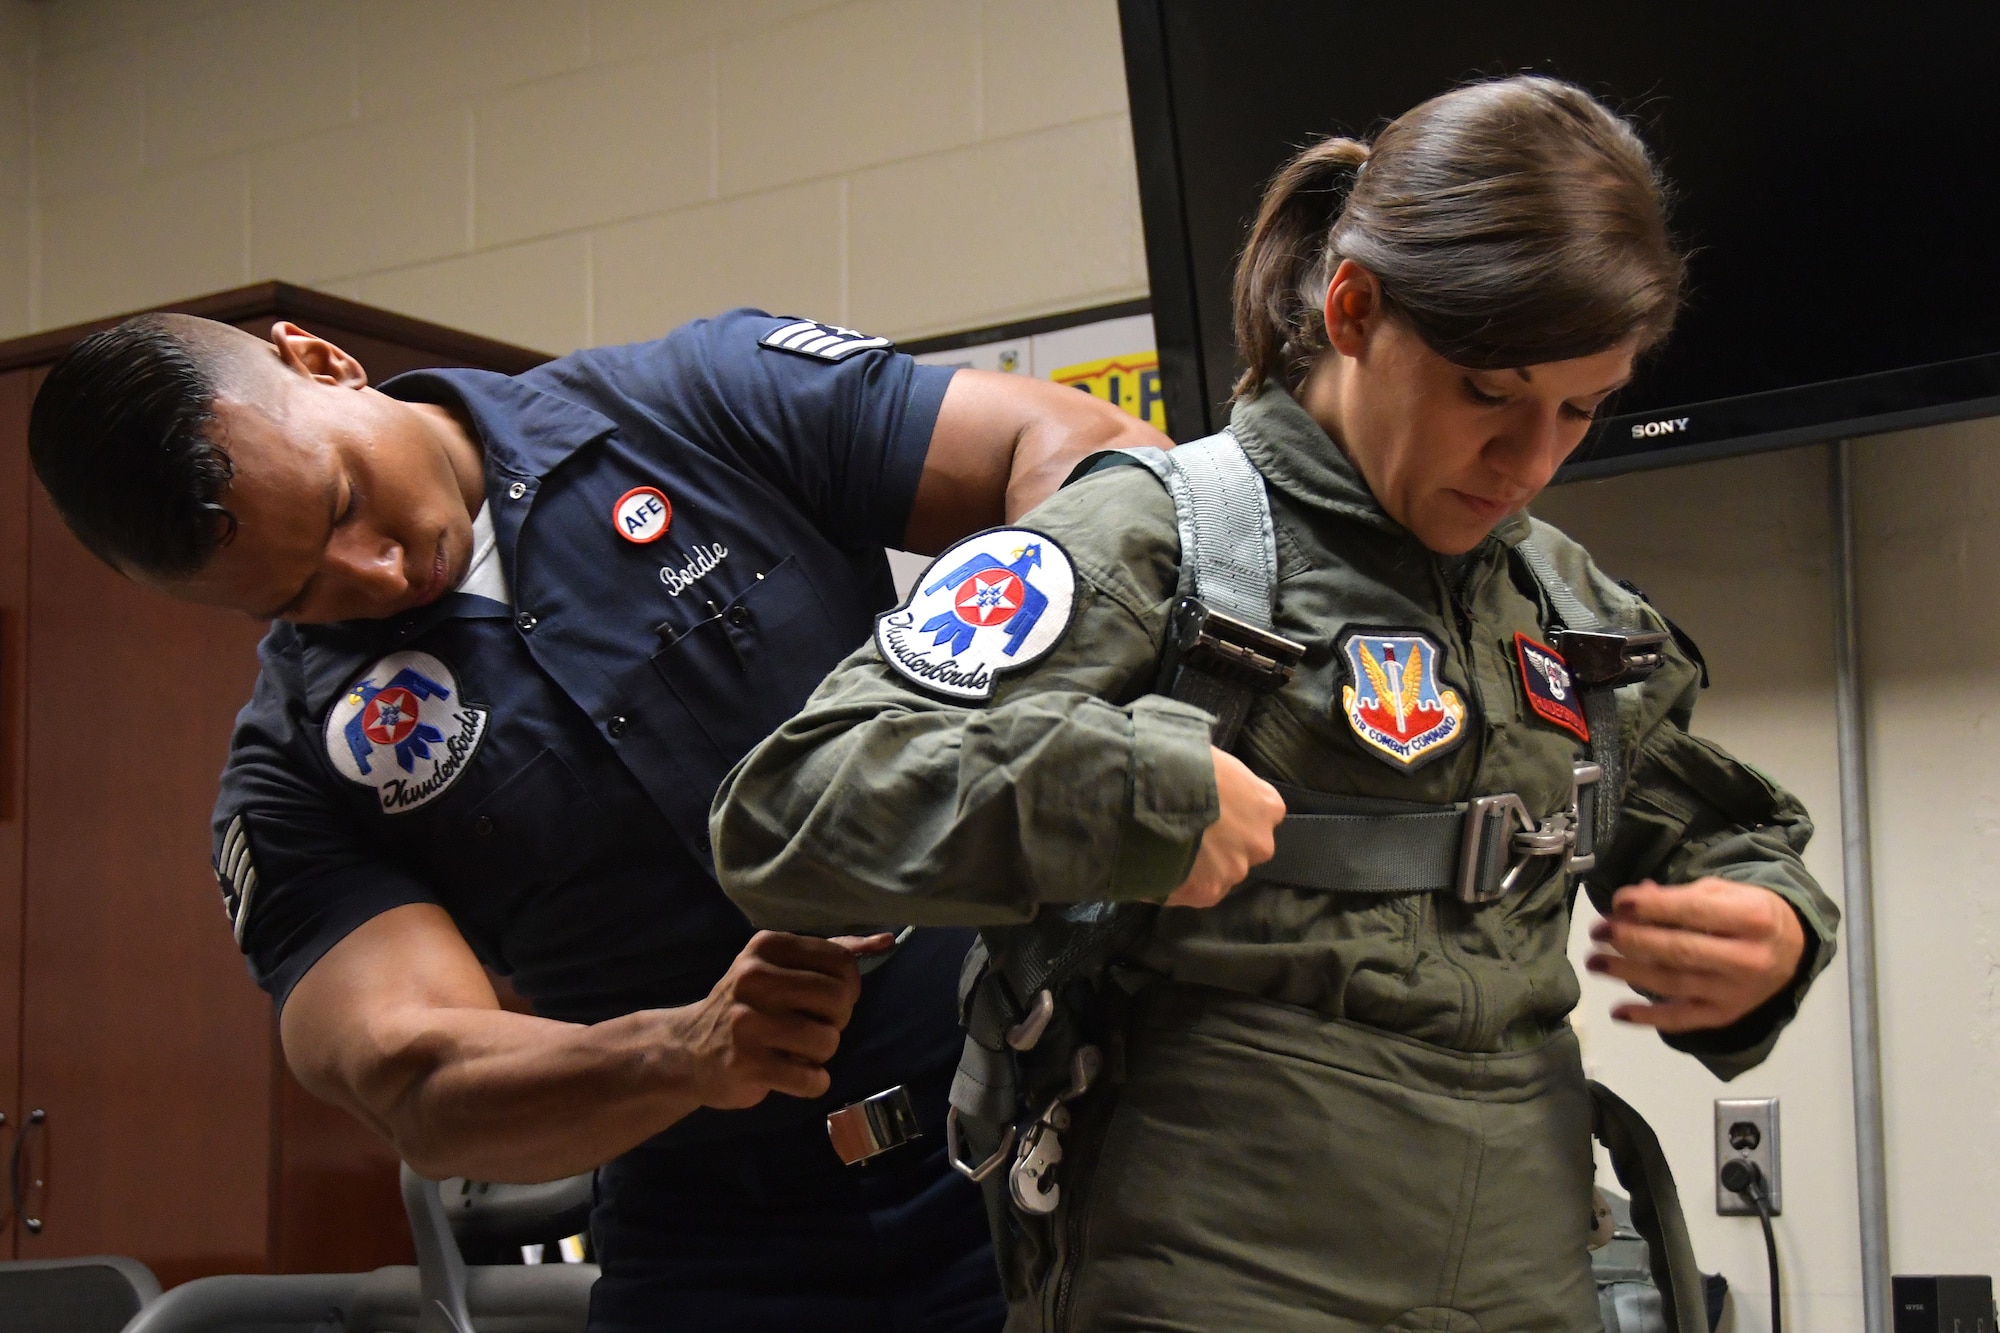 Staff Sgt. Kyle Boddie, U.S. Air Force Thunderbirds aircrew flight equipment technician, helps Tracey Pendley with her anti-gravity flight suit at Dobbins Air Reserve Base, Ga. on Oct. 11, 2019. The Hometown Hero program allows exceptional community members to be nominated for a familiarization flight in a Thunderbirds jet, an F-16 Fighting Falcon. (U.S. Air Force photo/Airman Kendra A. Ransum)